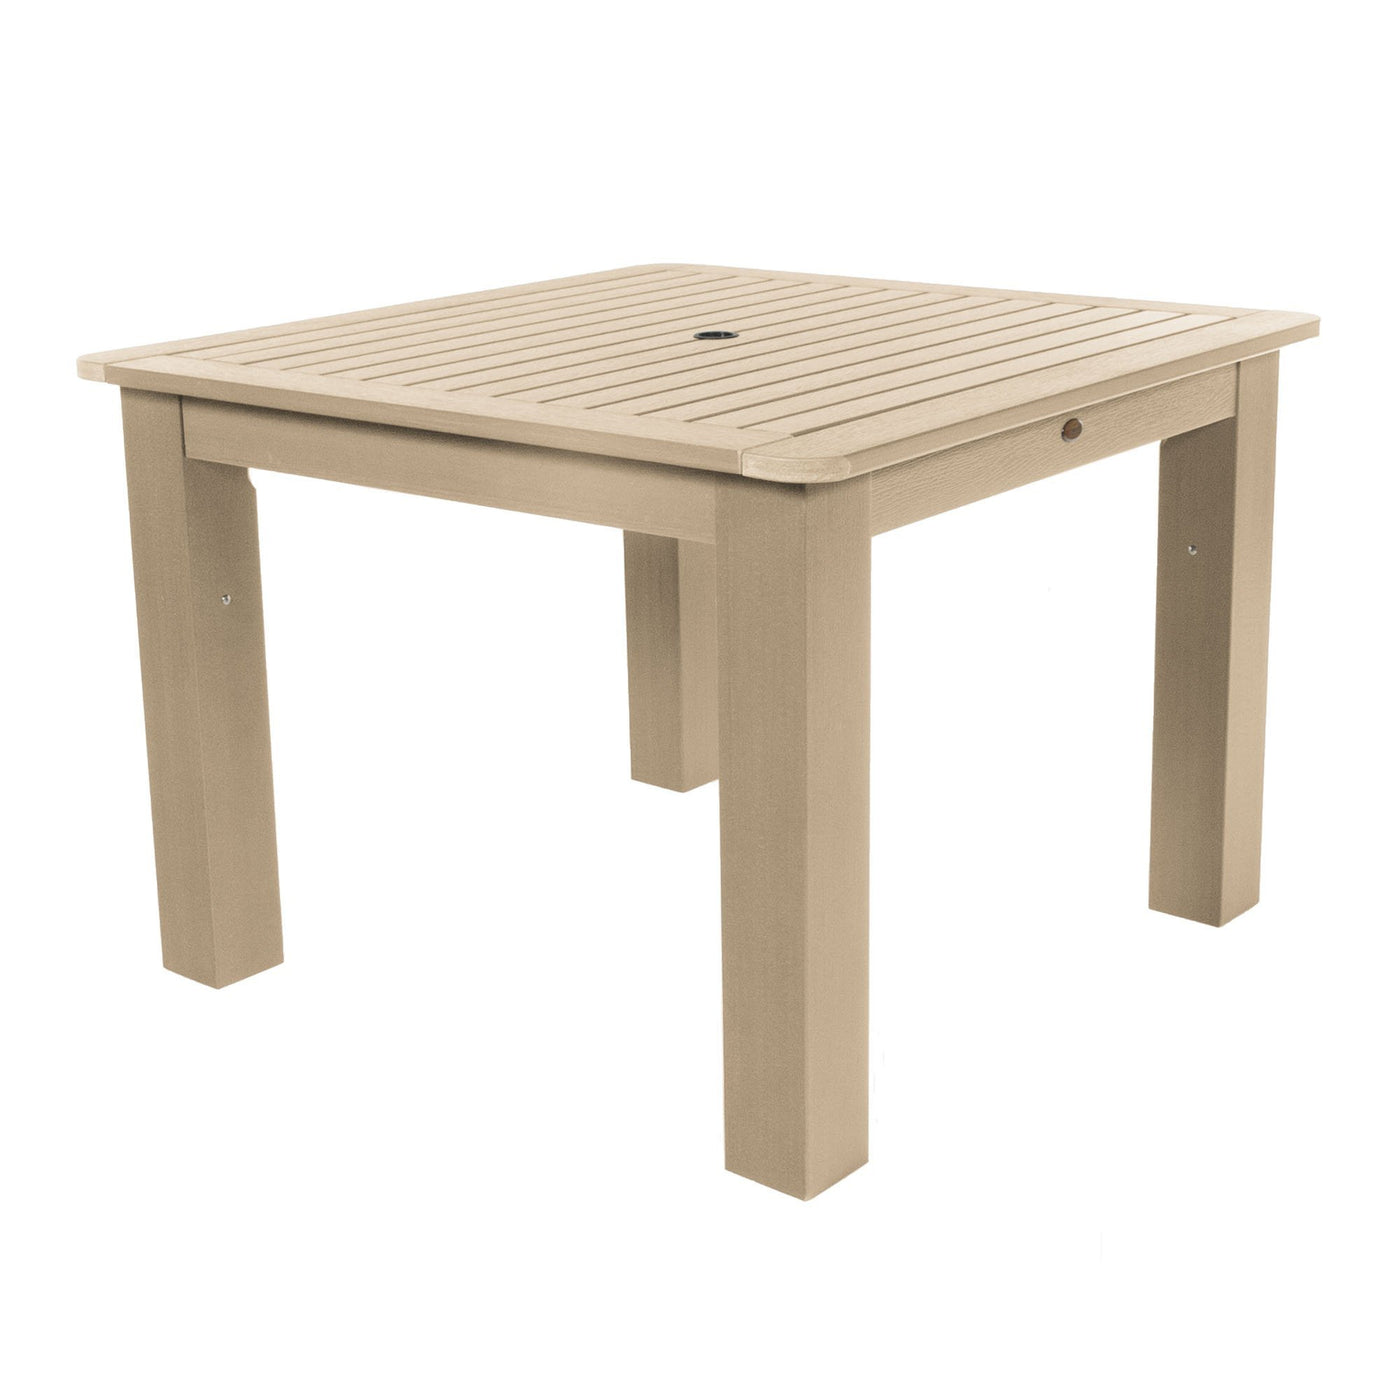 Square 42in x 42in Dining Table - Dining Height Dining Highwood USA Tuscan Taupe 